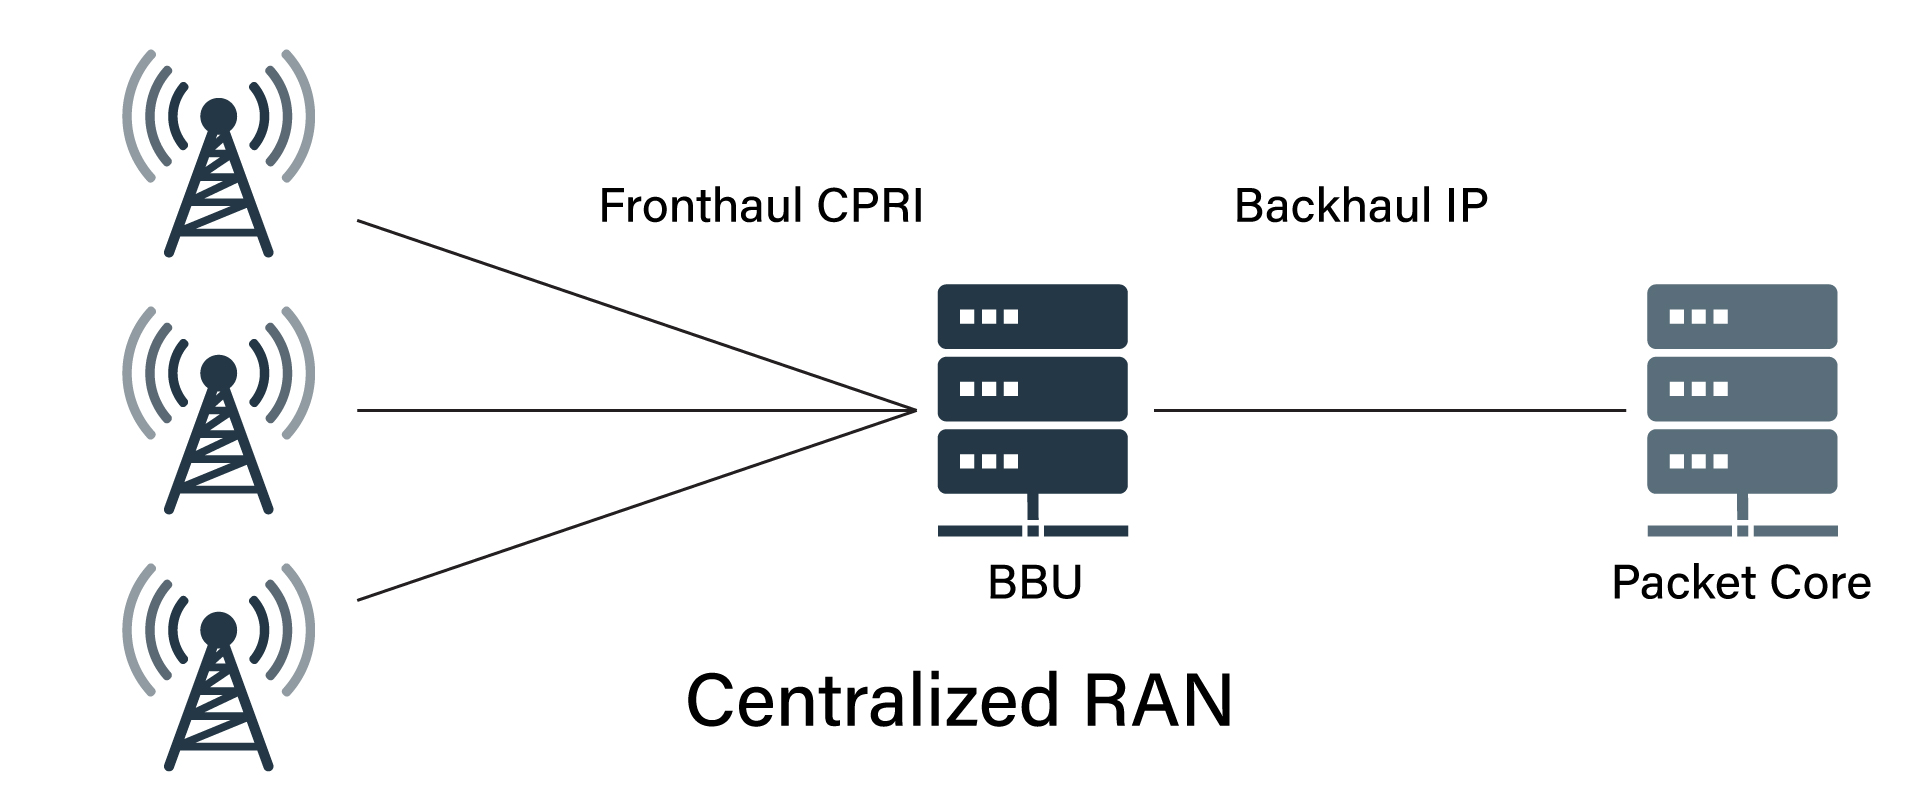 Diagram of Centralized RAN with Fronthaul CPRI and Backhaul IP